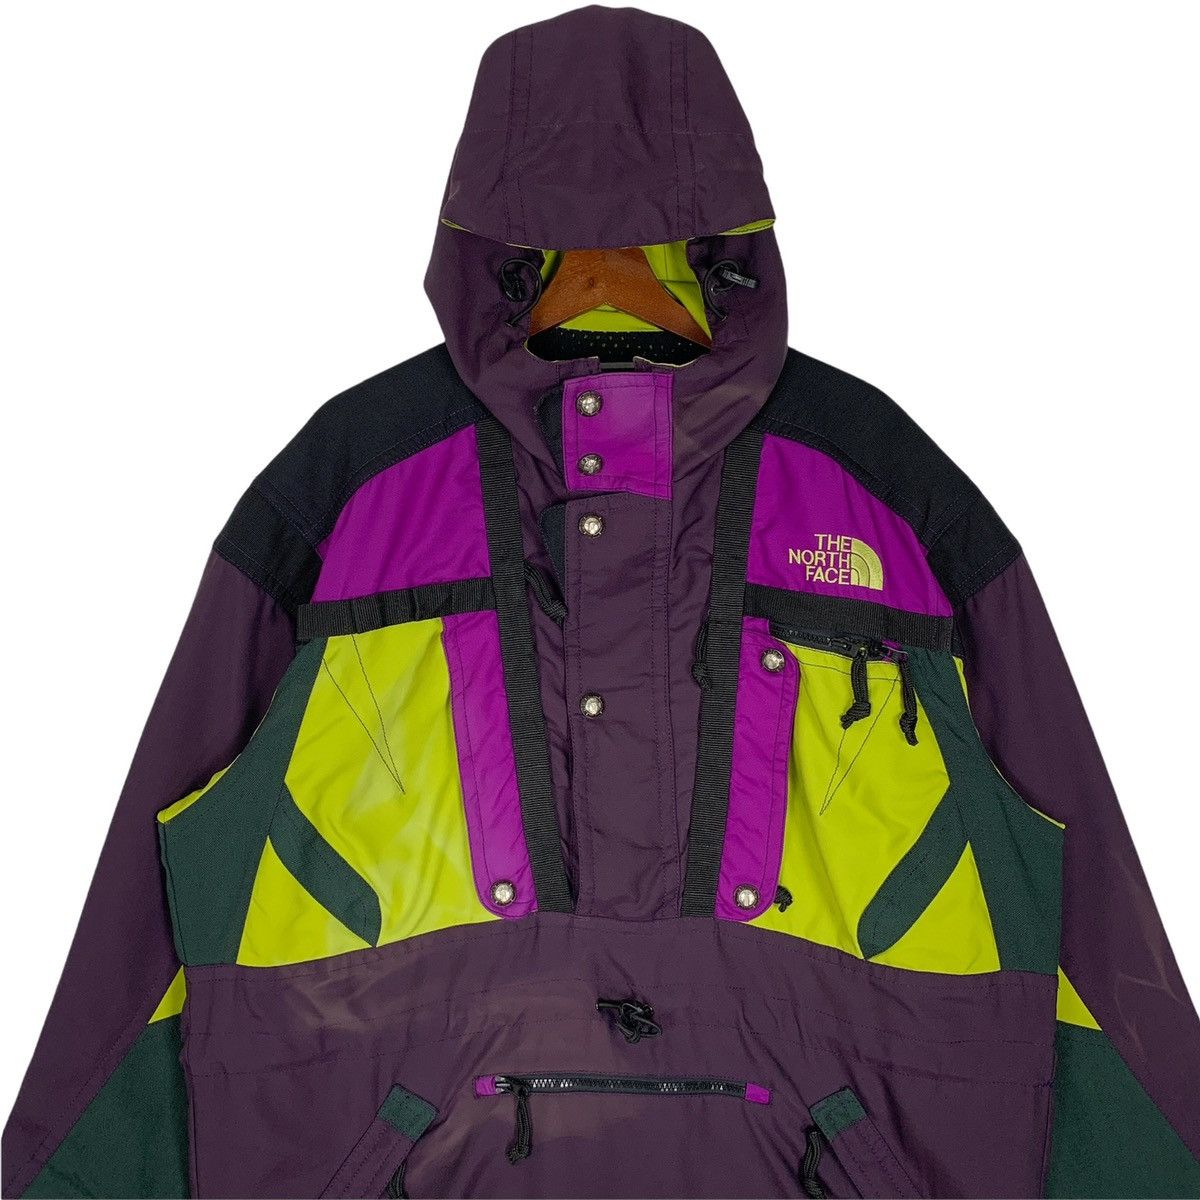 The North Face Color Block Winter Jacket - 2